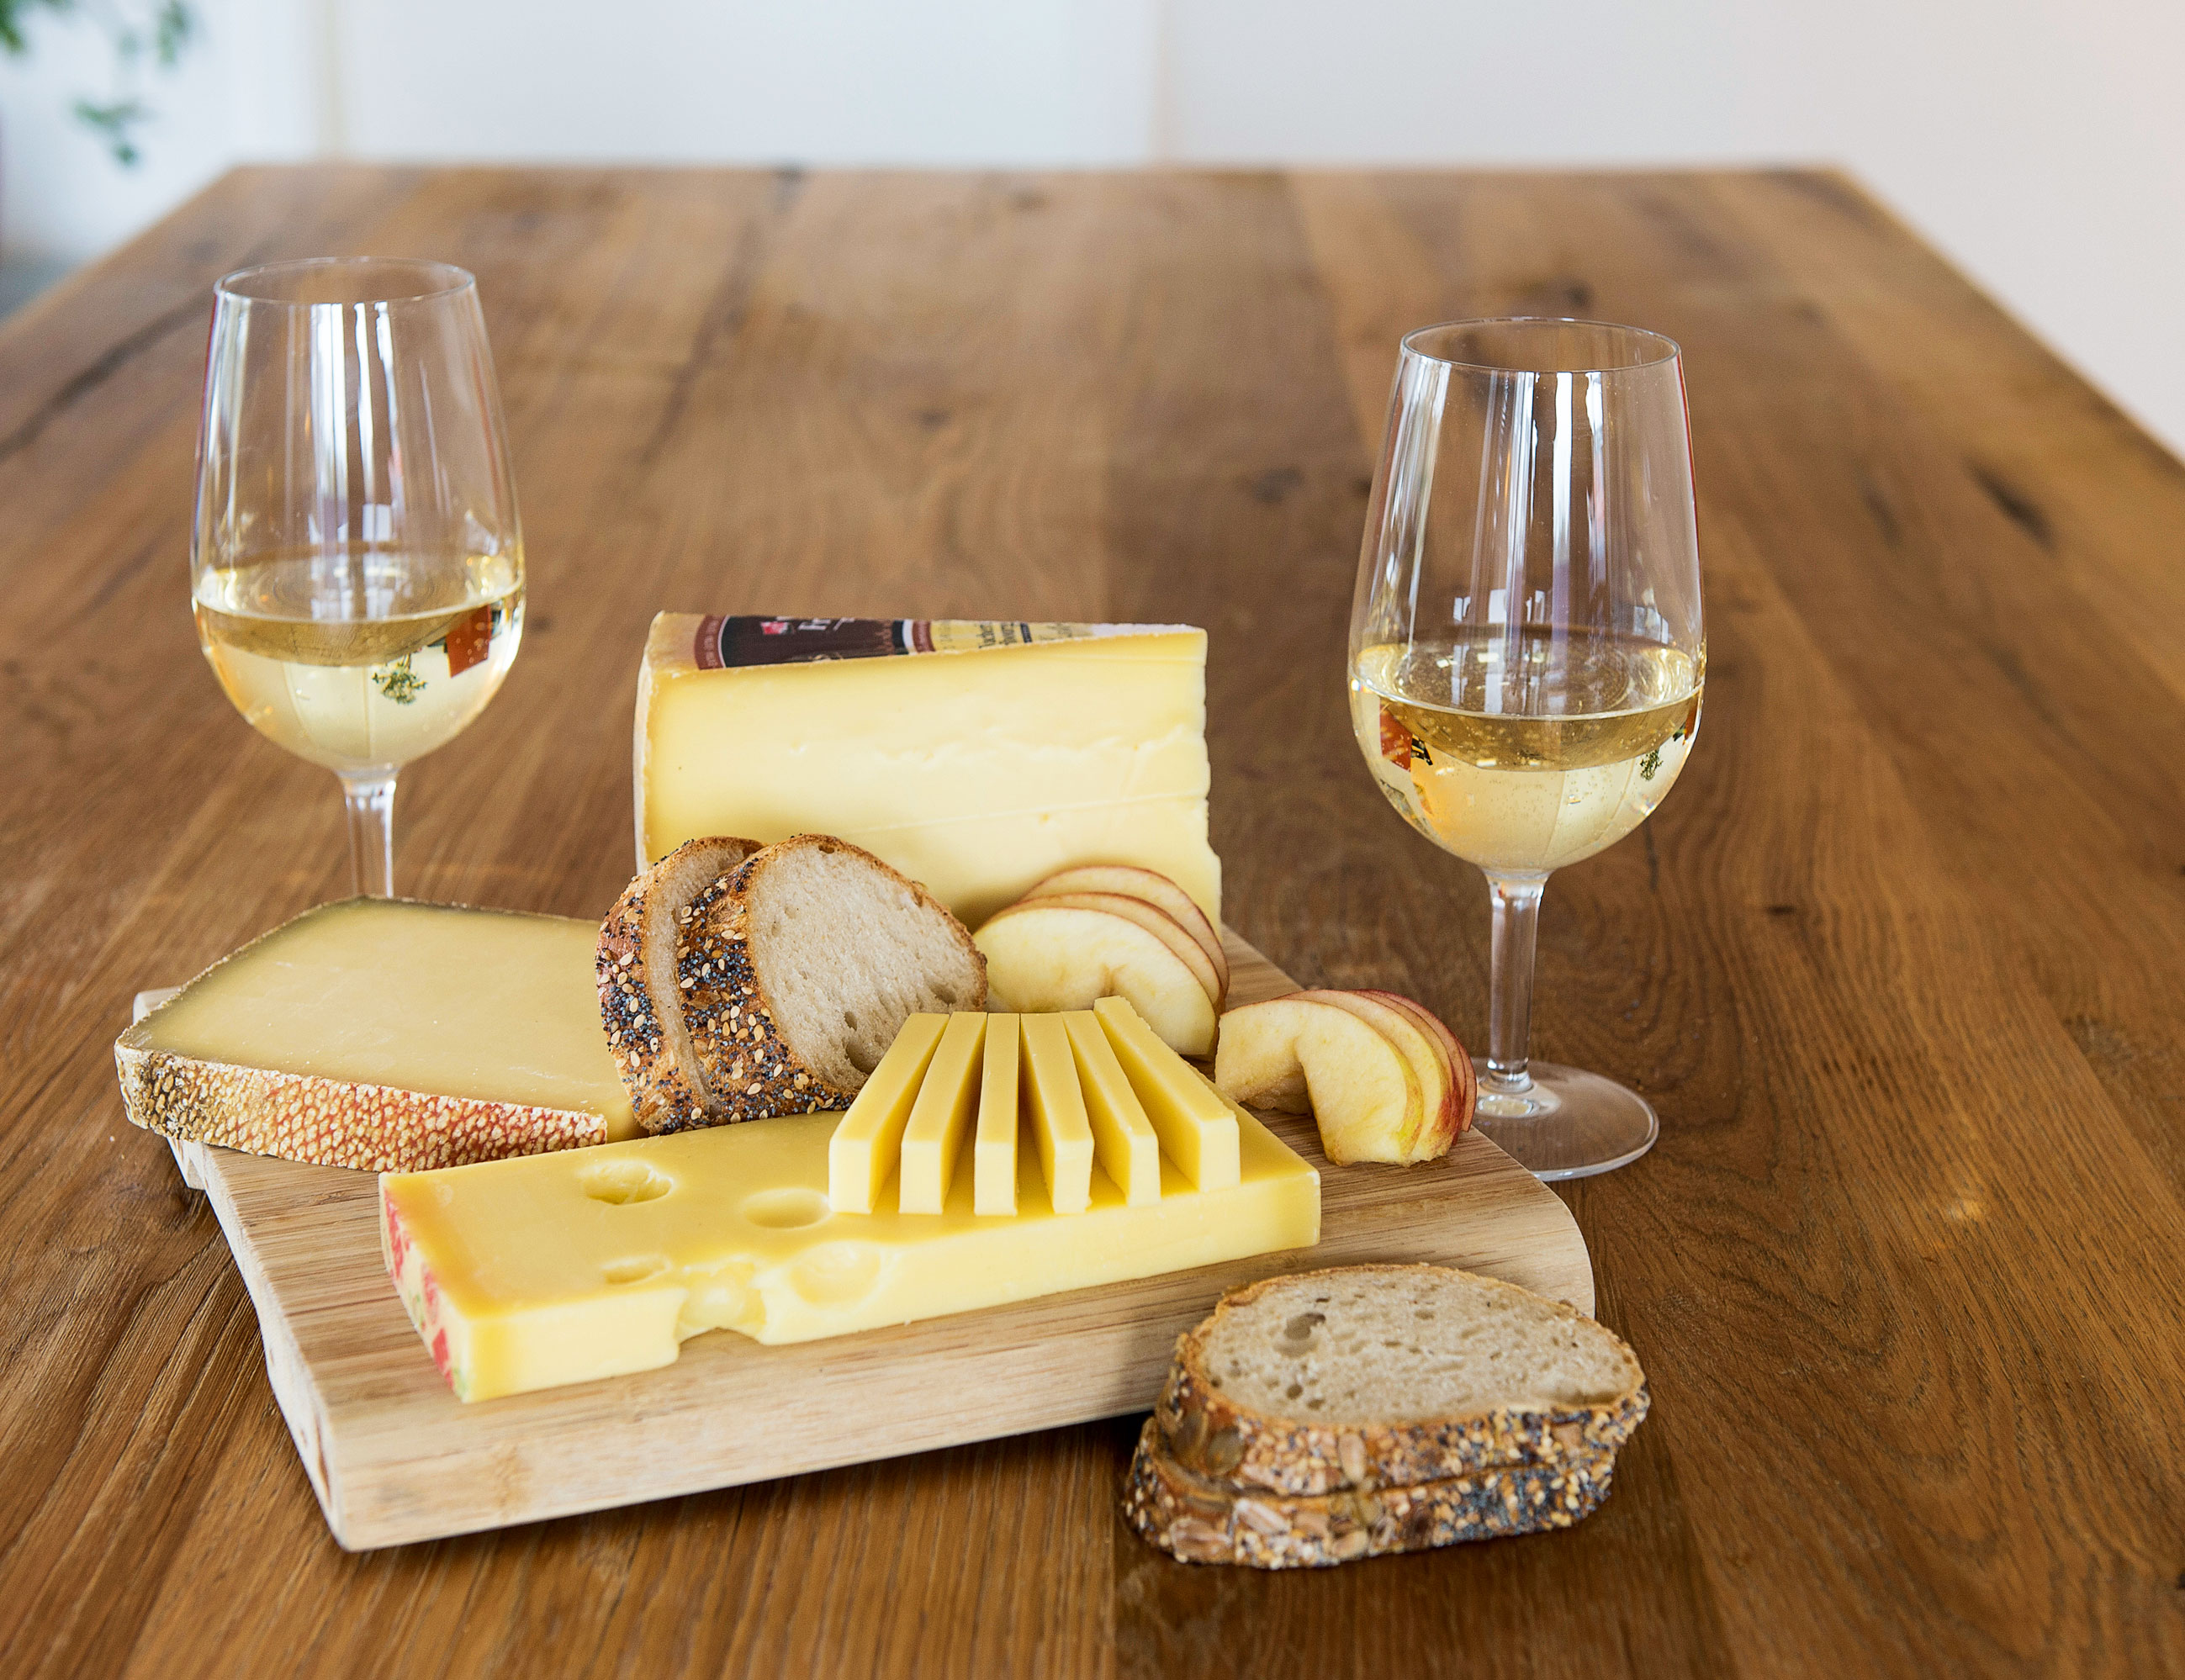 Swiss wines and cheeses: a happy wedding